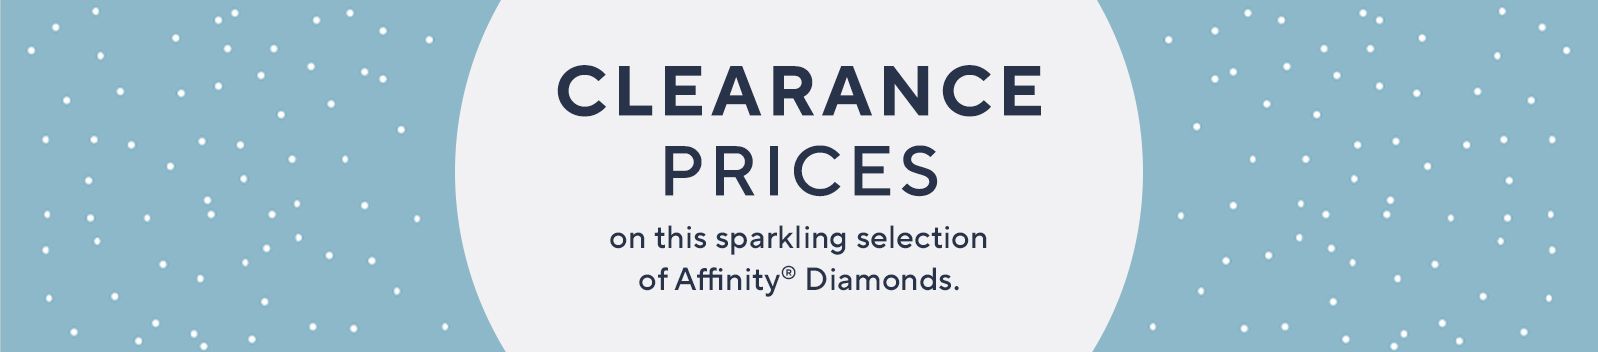 Clearance Prices on this sparkling selection of Affinity® Diamonds.